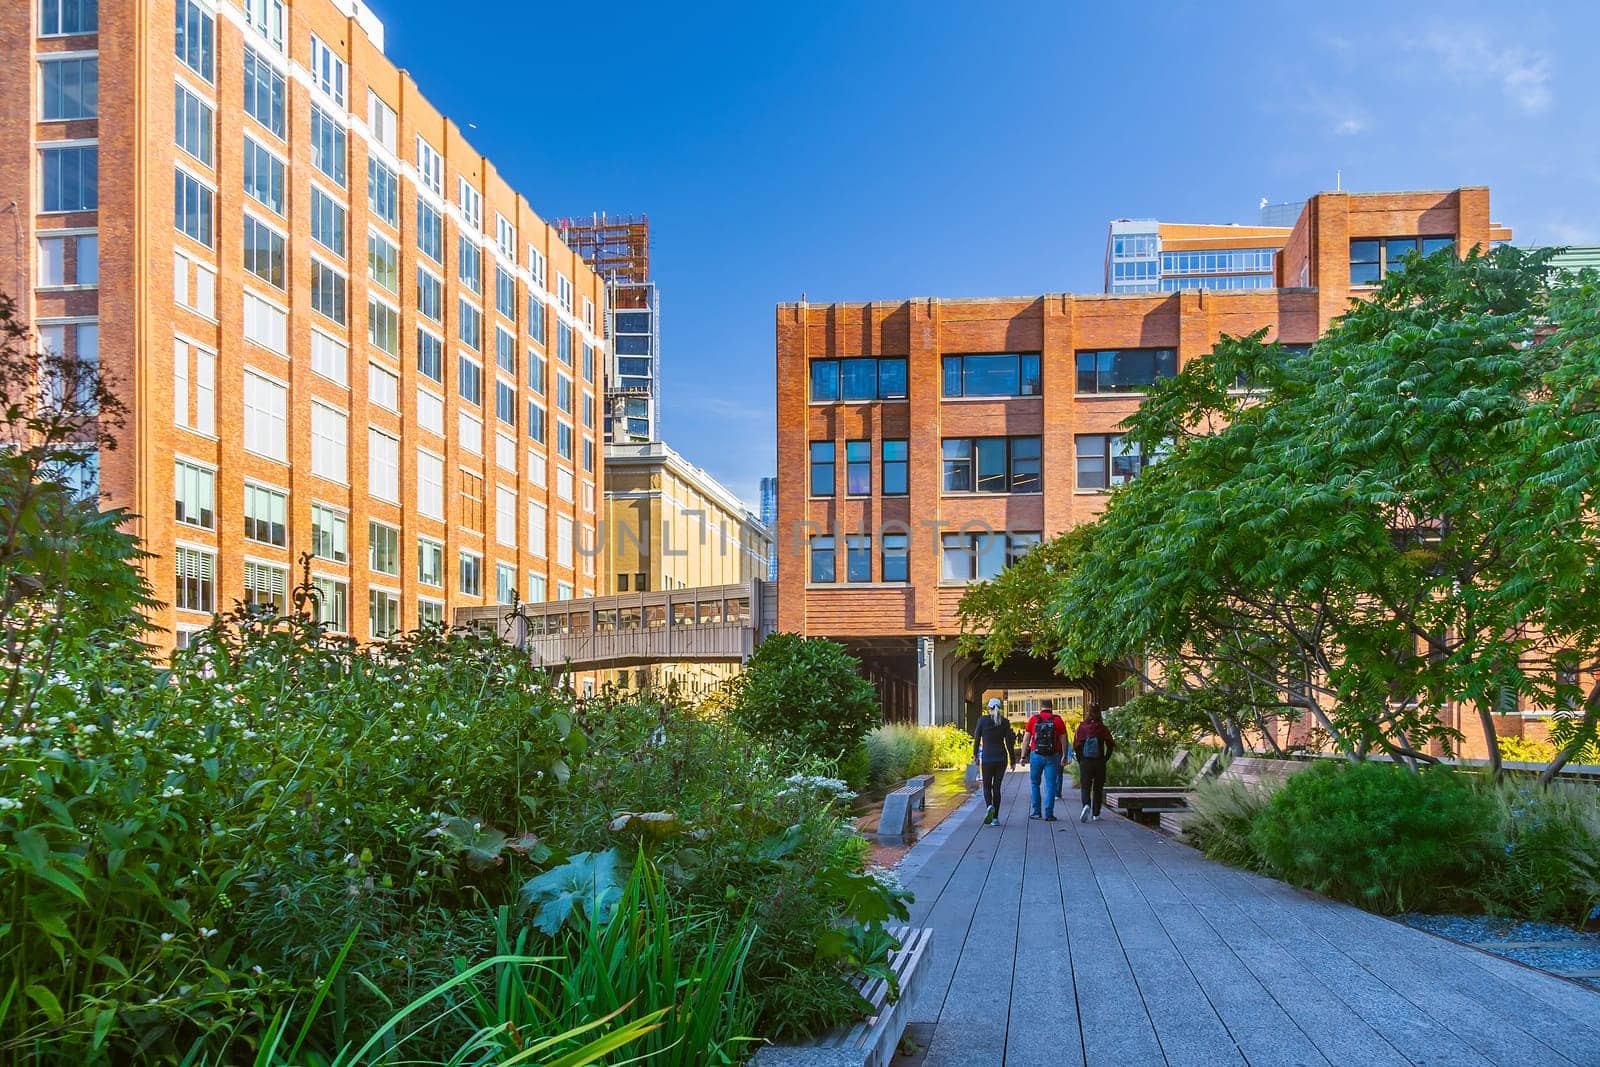 The High Line, a famous public park in Manhattan United States